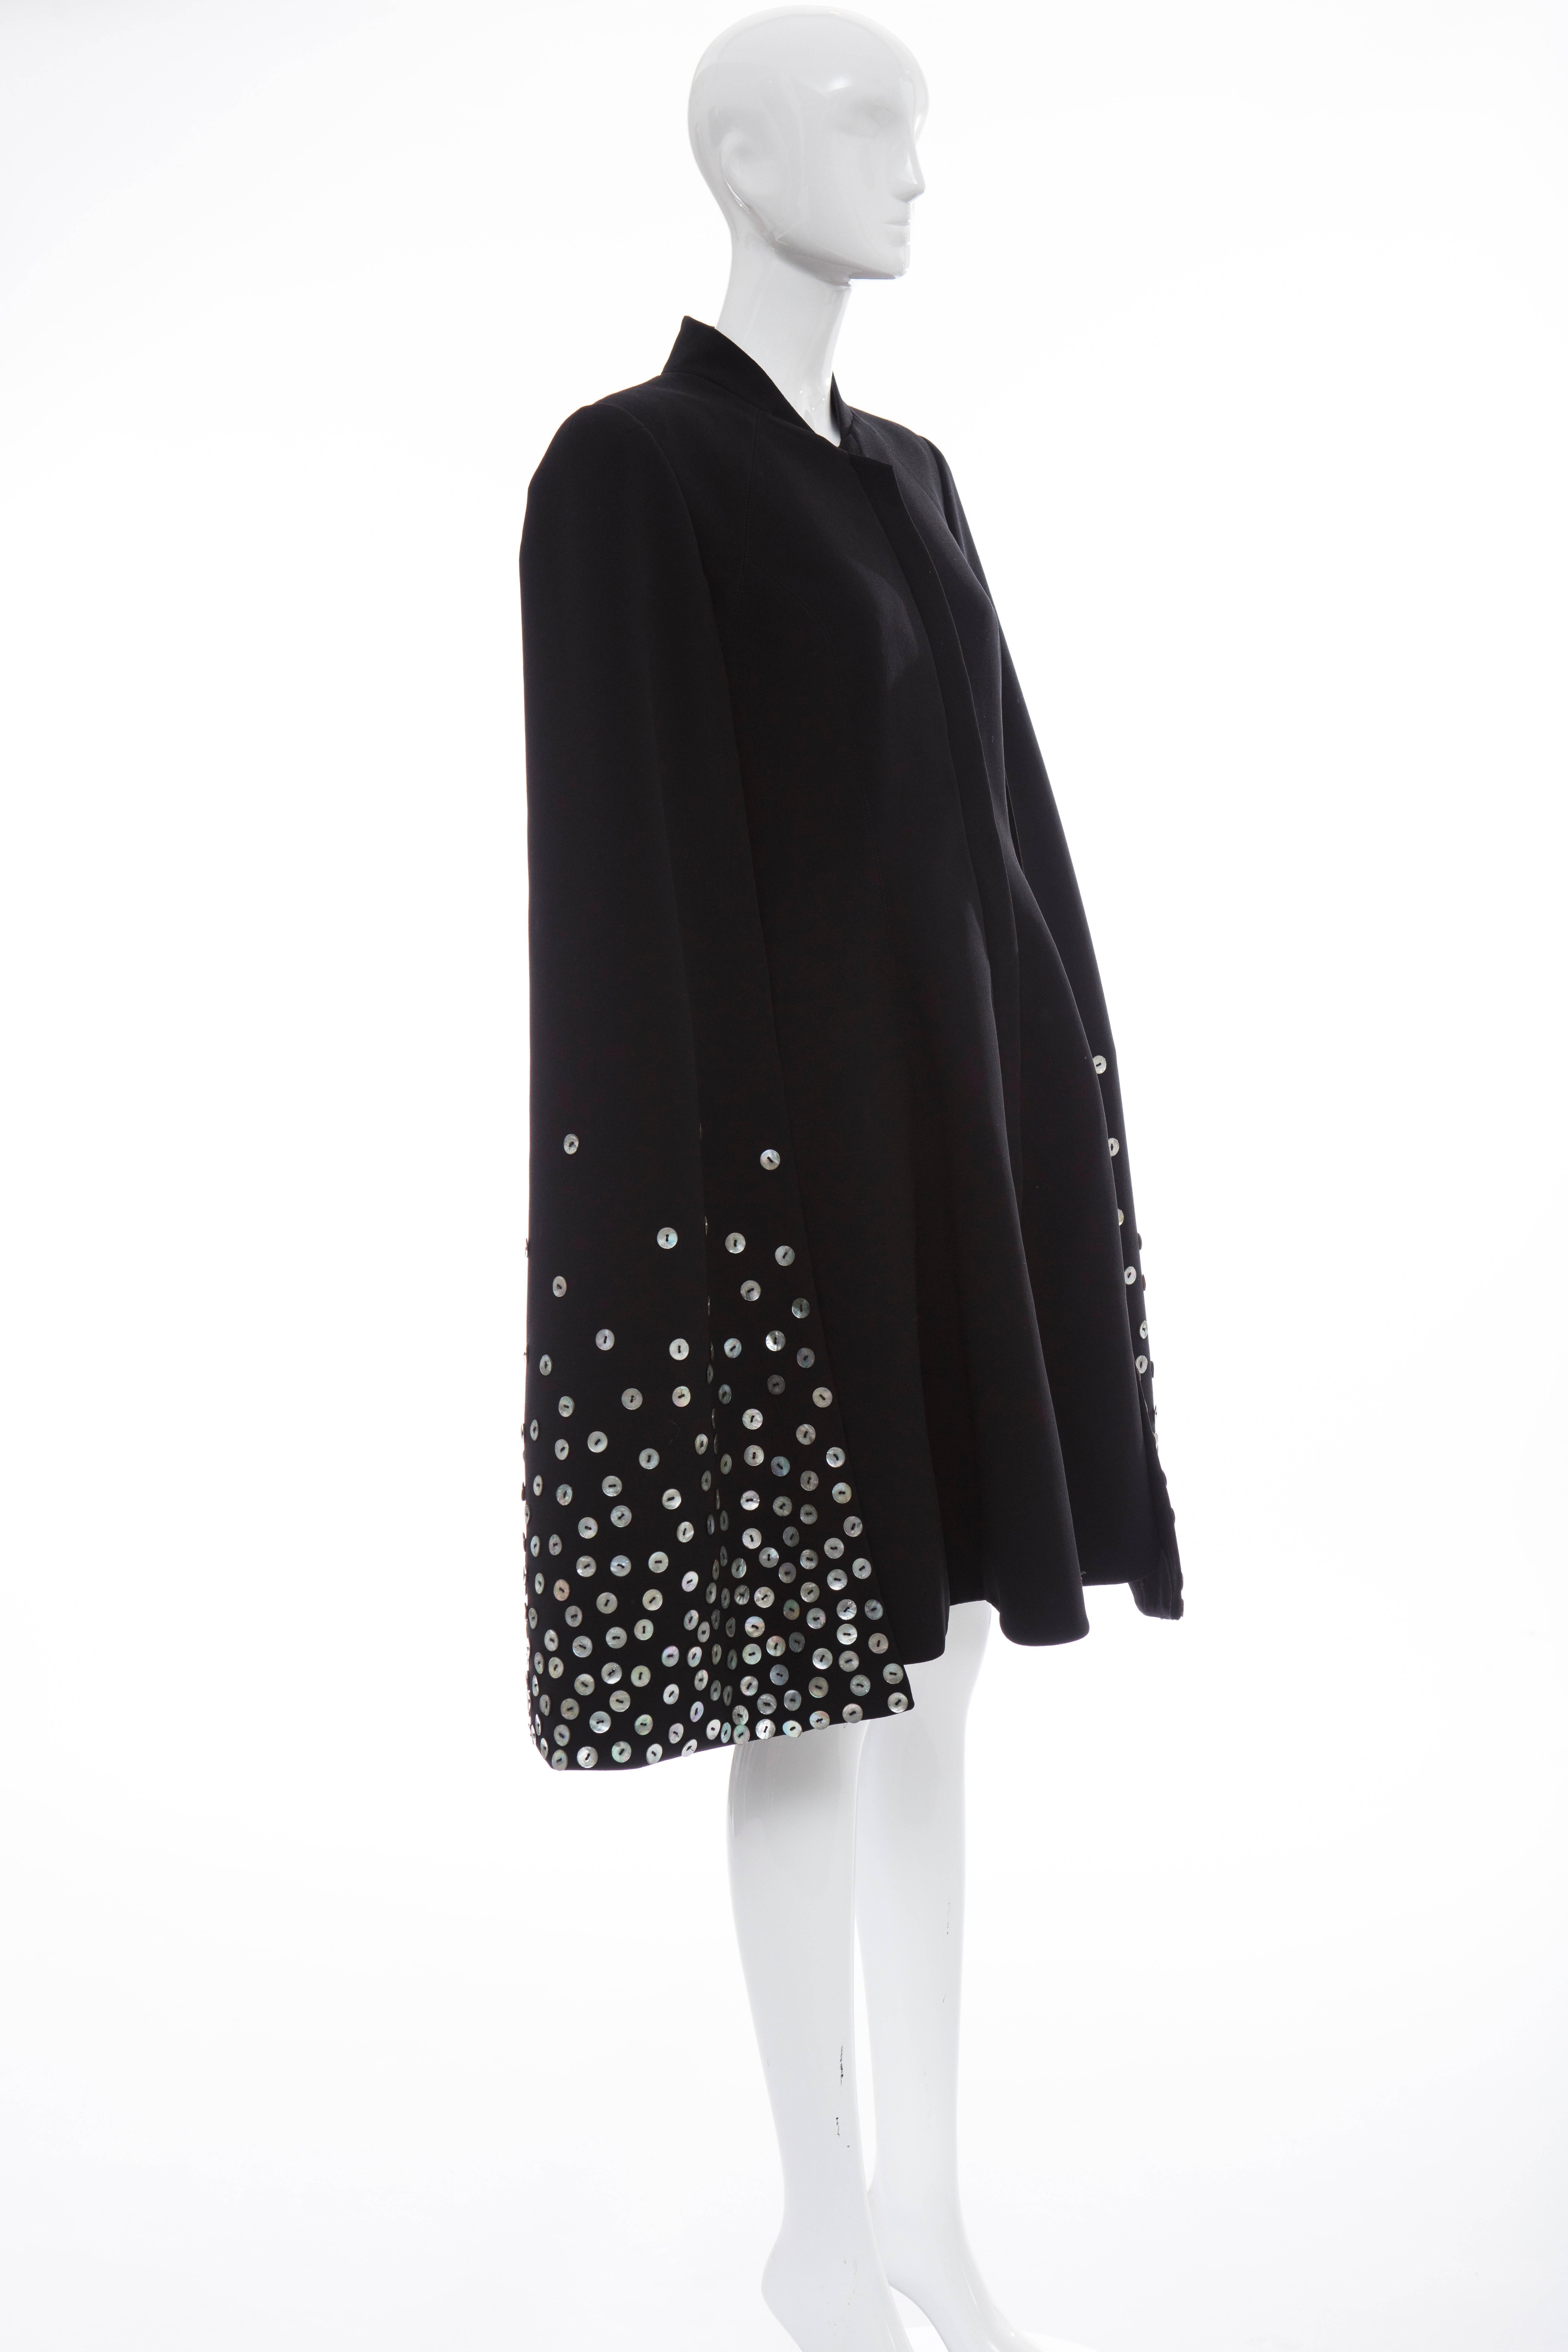 Women's Gareth Pugh Zip Front Black Dress With Mother of Pearl Cape, Spring 2015 For Sale